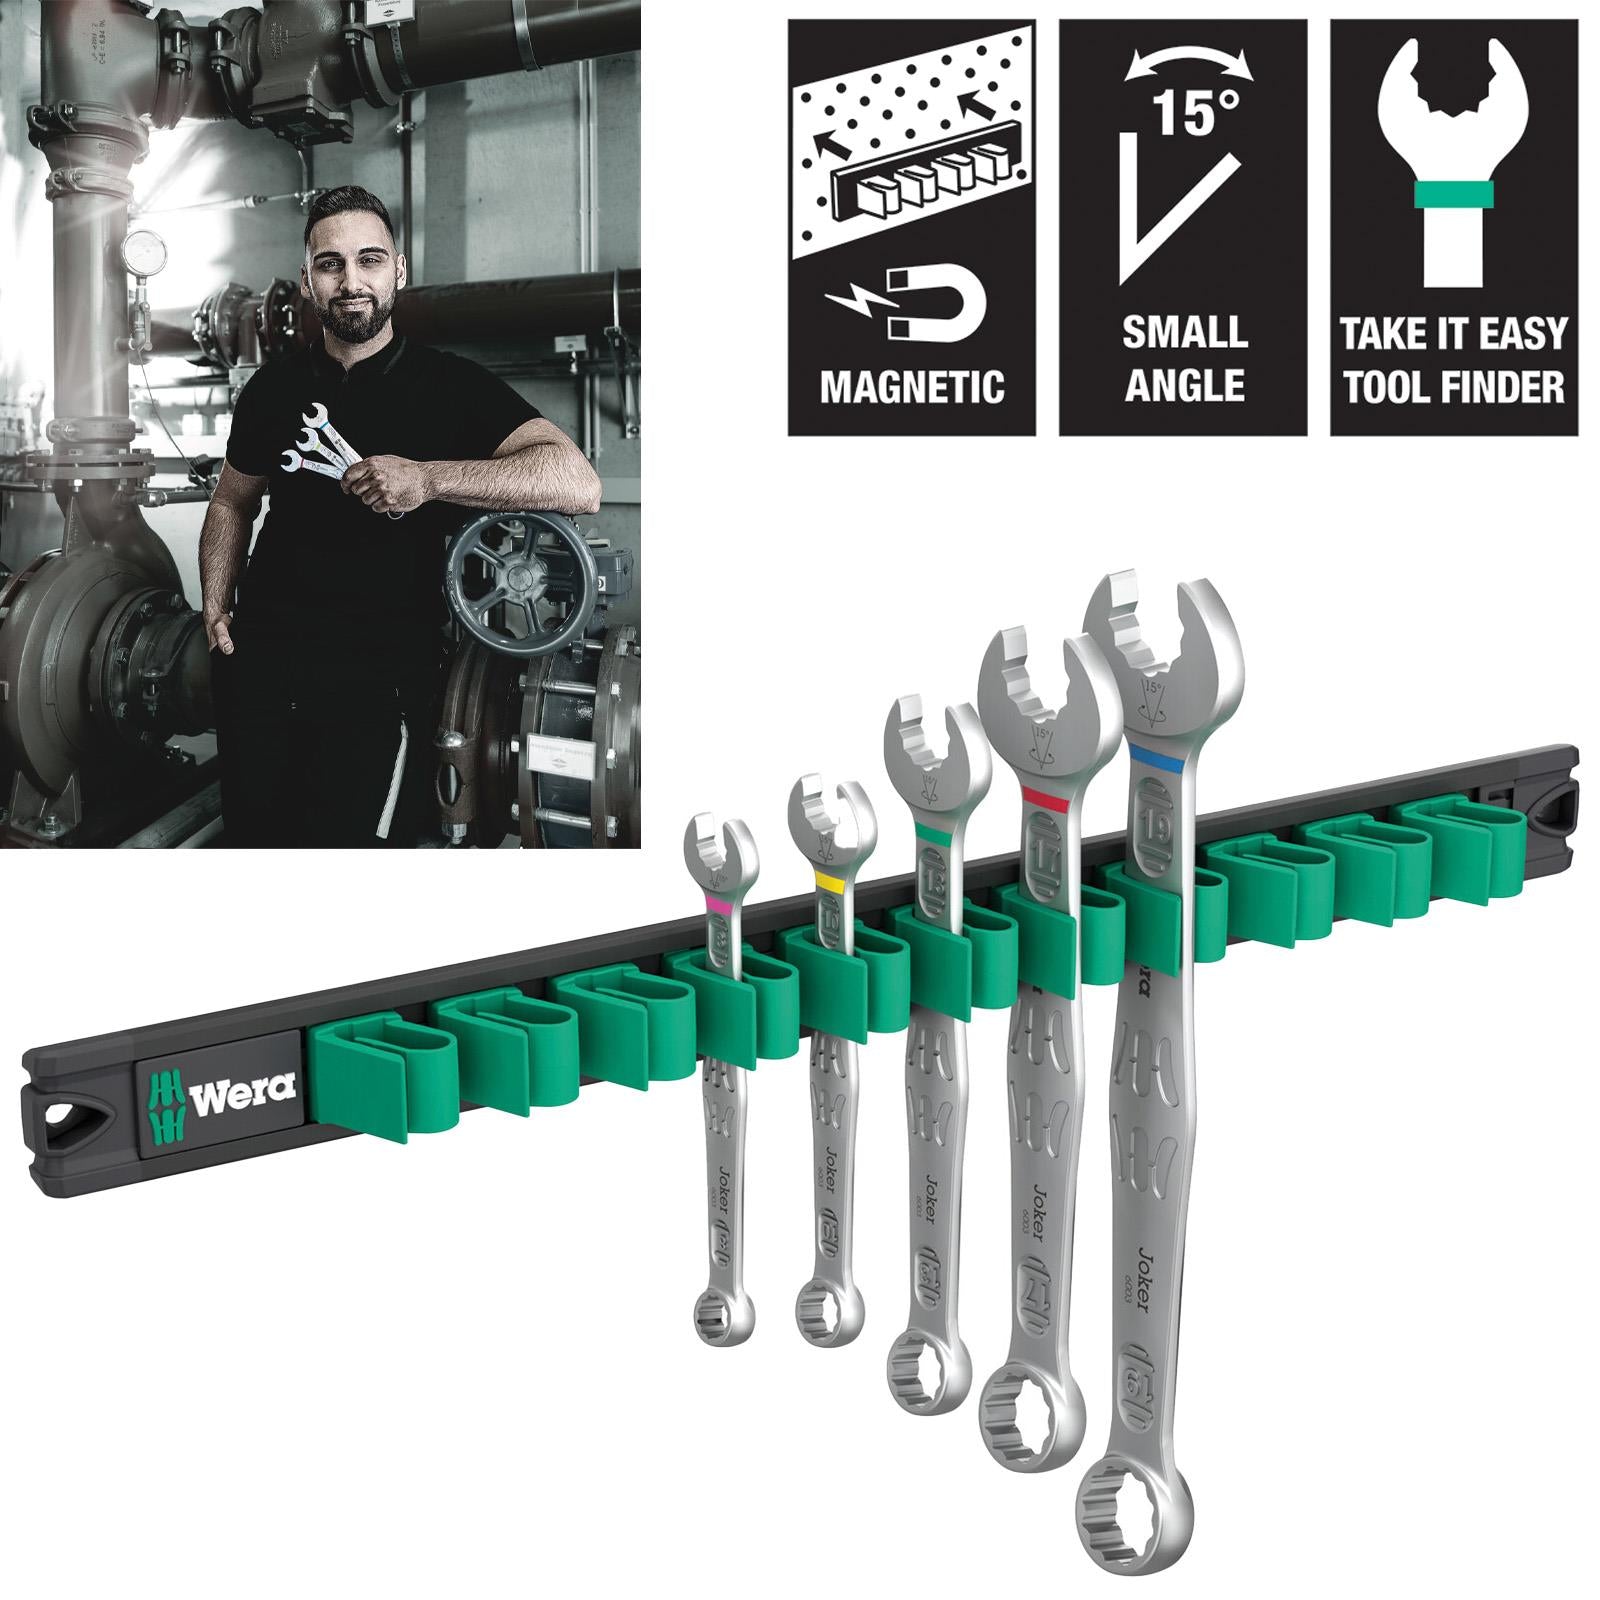 Wera Combination Spanner Wrench Set 6003 Joker 2 9641 Magnetic Rail 5 Pieces 8-19mm